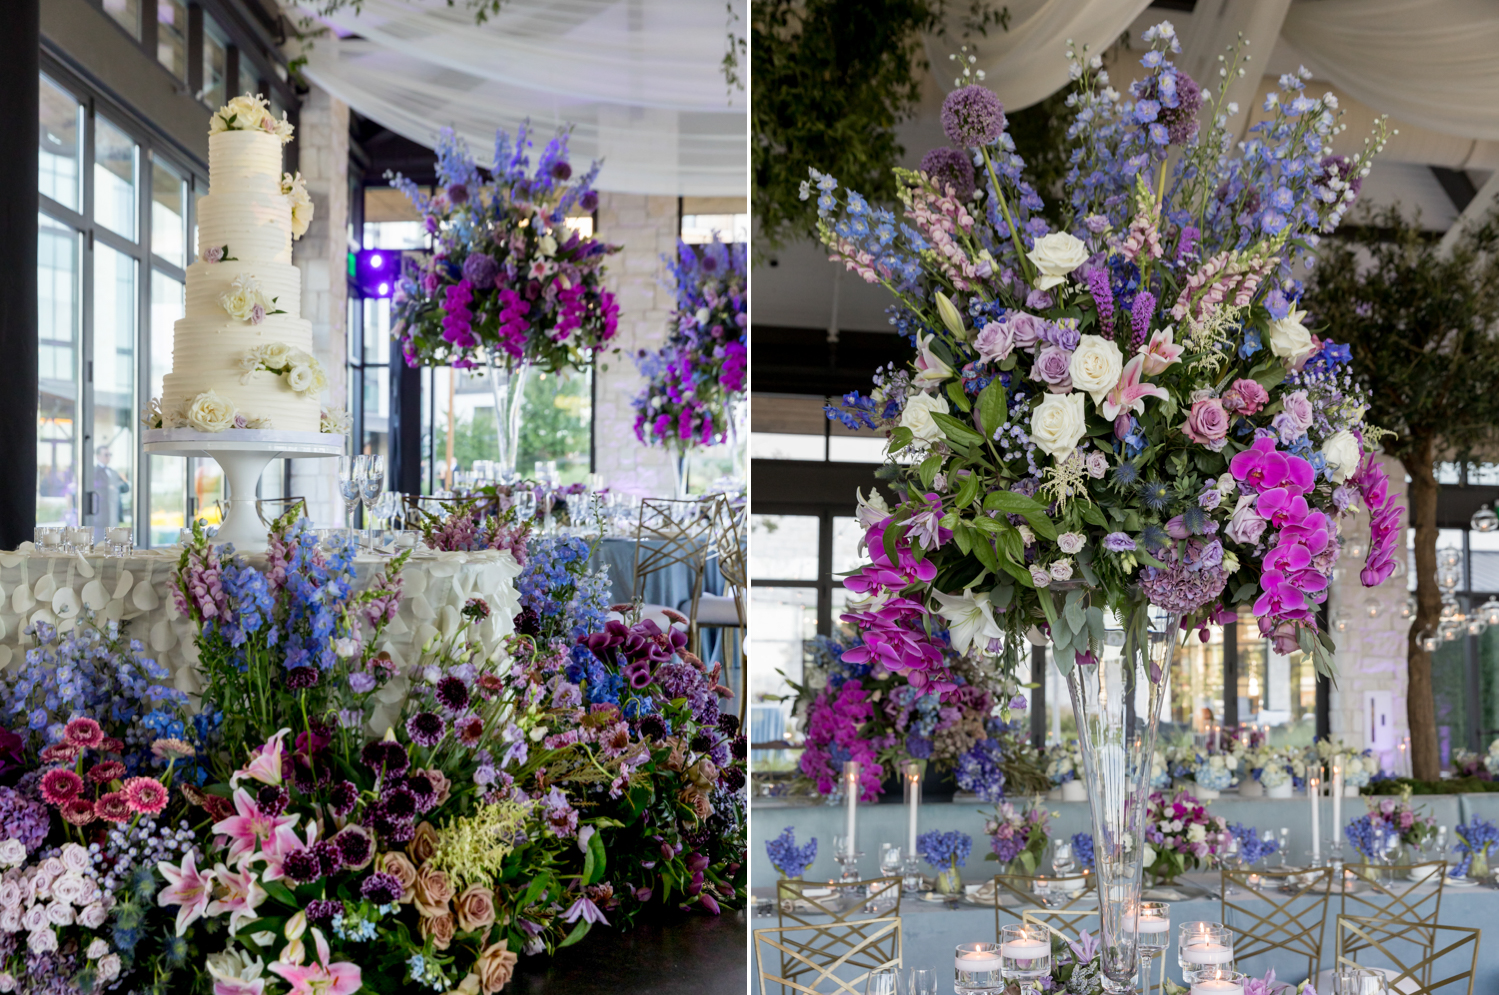 Left: The 5-tier wedding cake with white flowers sits on a table, surrounded by lush florals at the base of the table. Right: A tall flower arrangement in a glass vase sits in the middle of a reception dinner table.